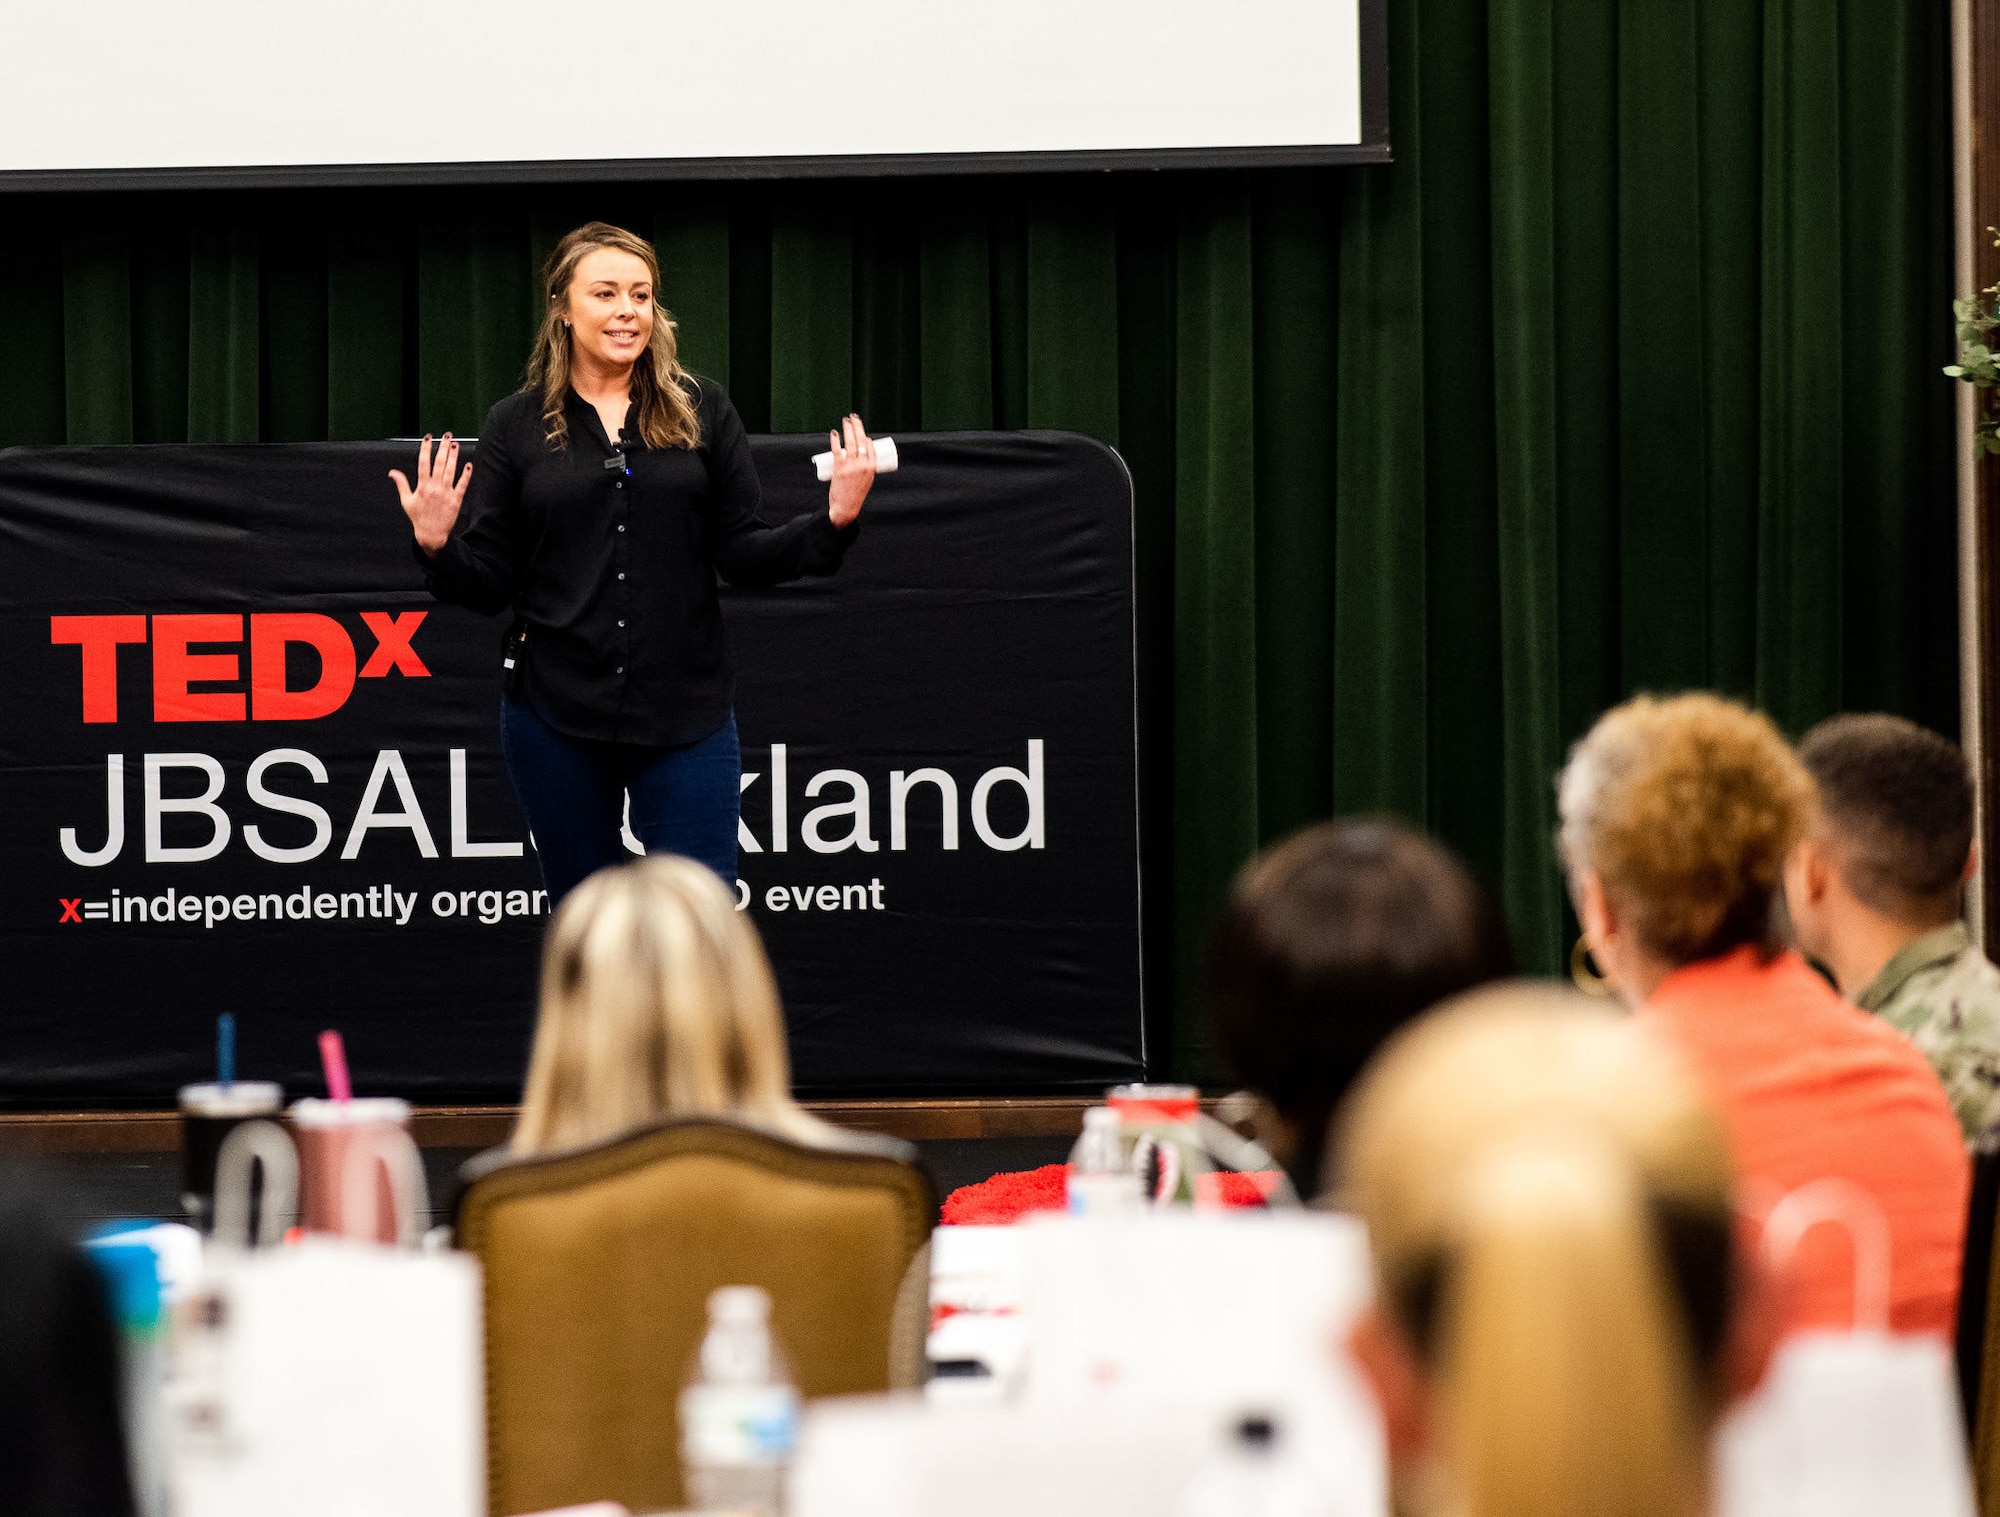 Guest speaker addresses crowd at TEDx event held at Joint Base San Antonio-Lackland, Texas, Nov. 4.